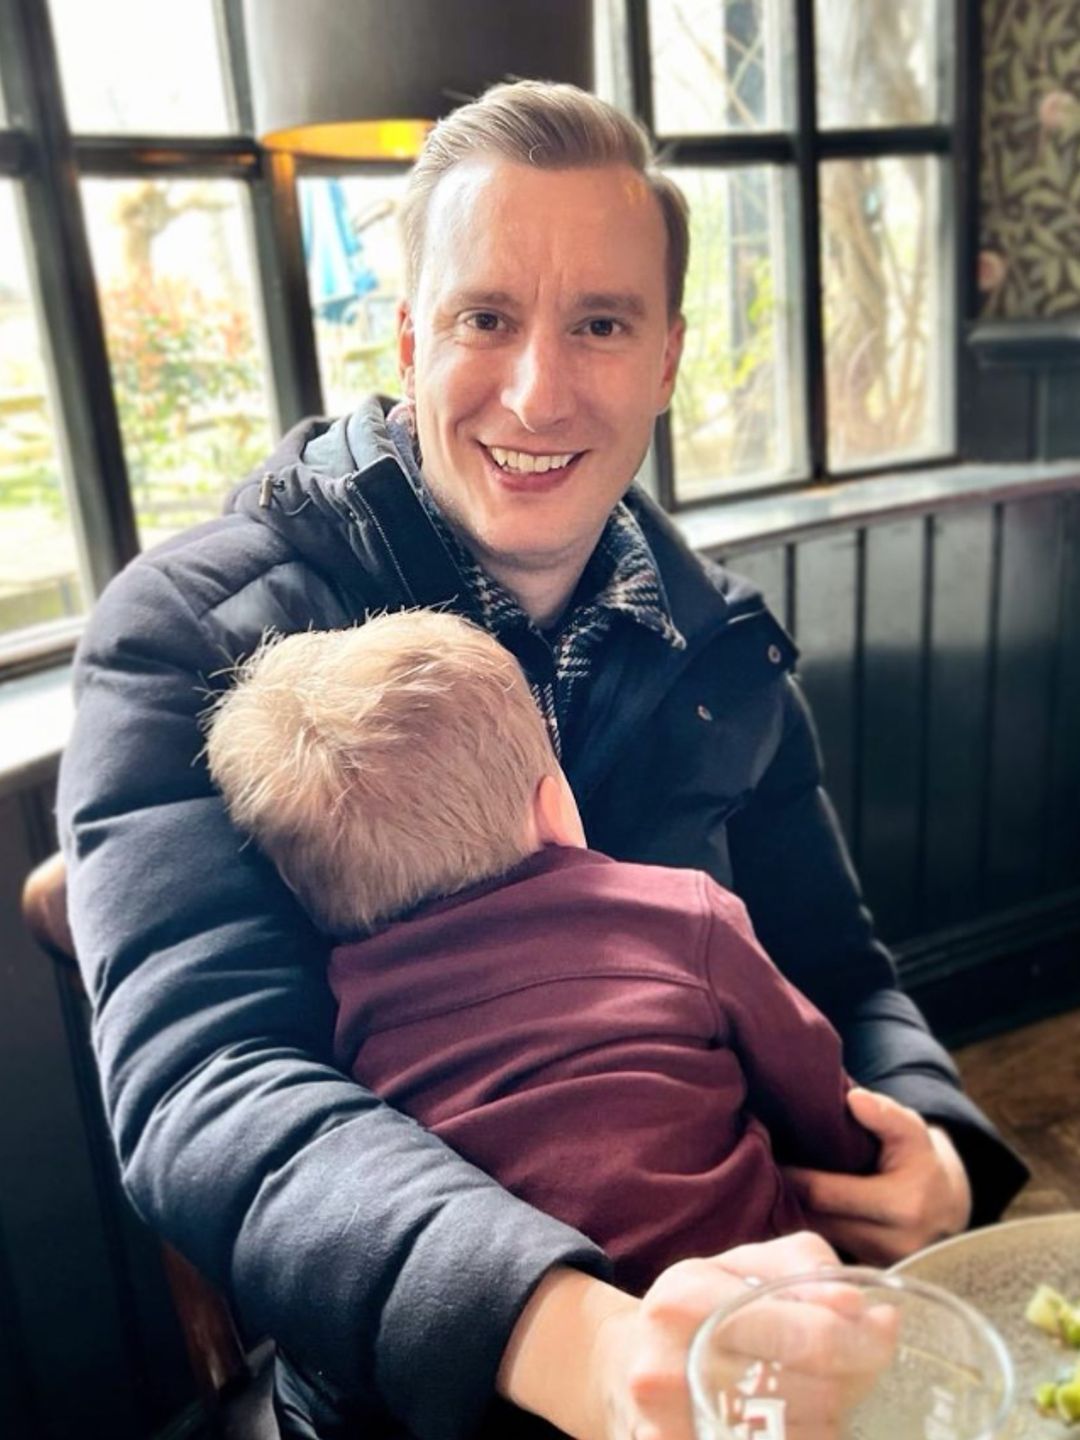 Paul Brand with his son in a pub